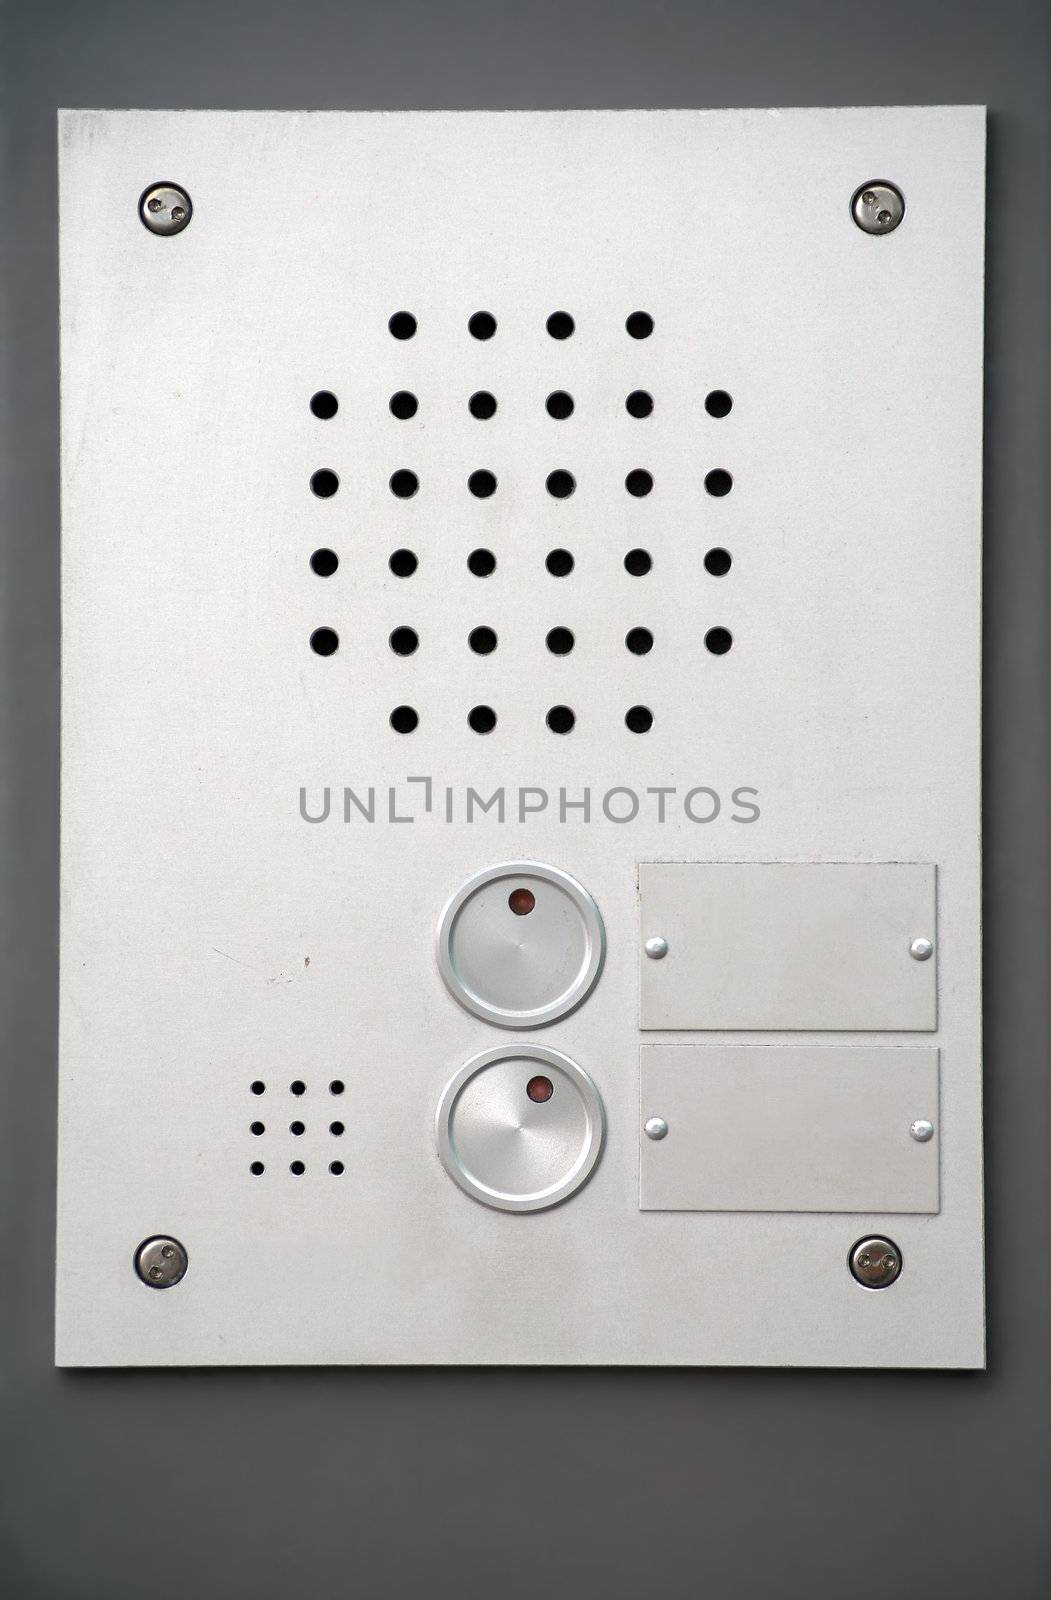 Talk to me, please! Outside intercom panel with two empty name plates (so you could insert your own text).